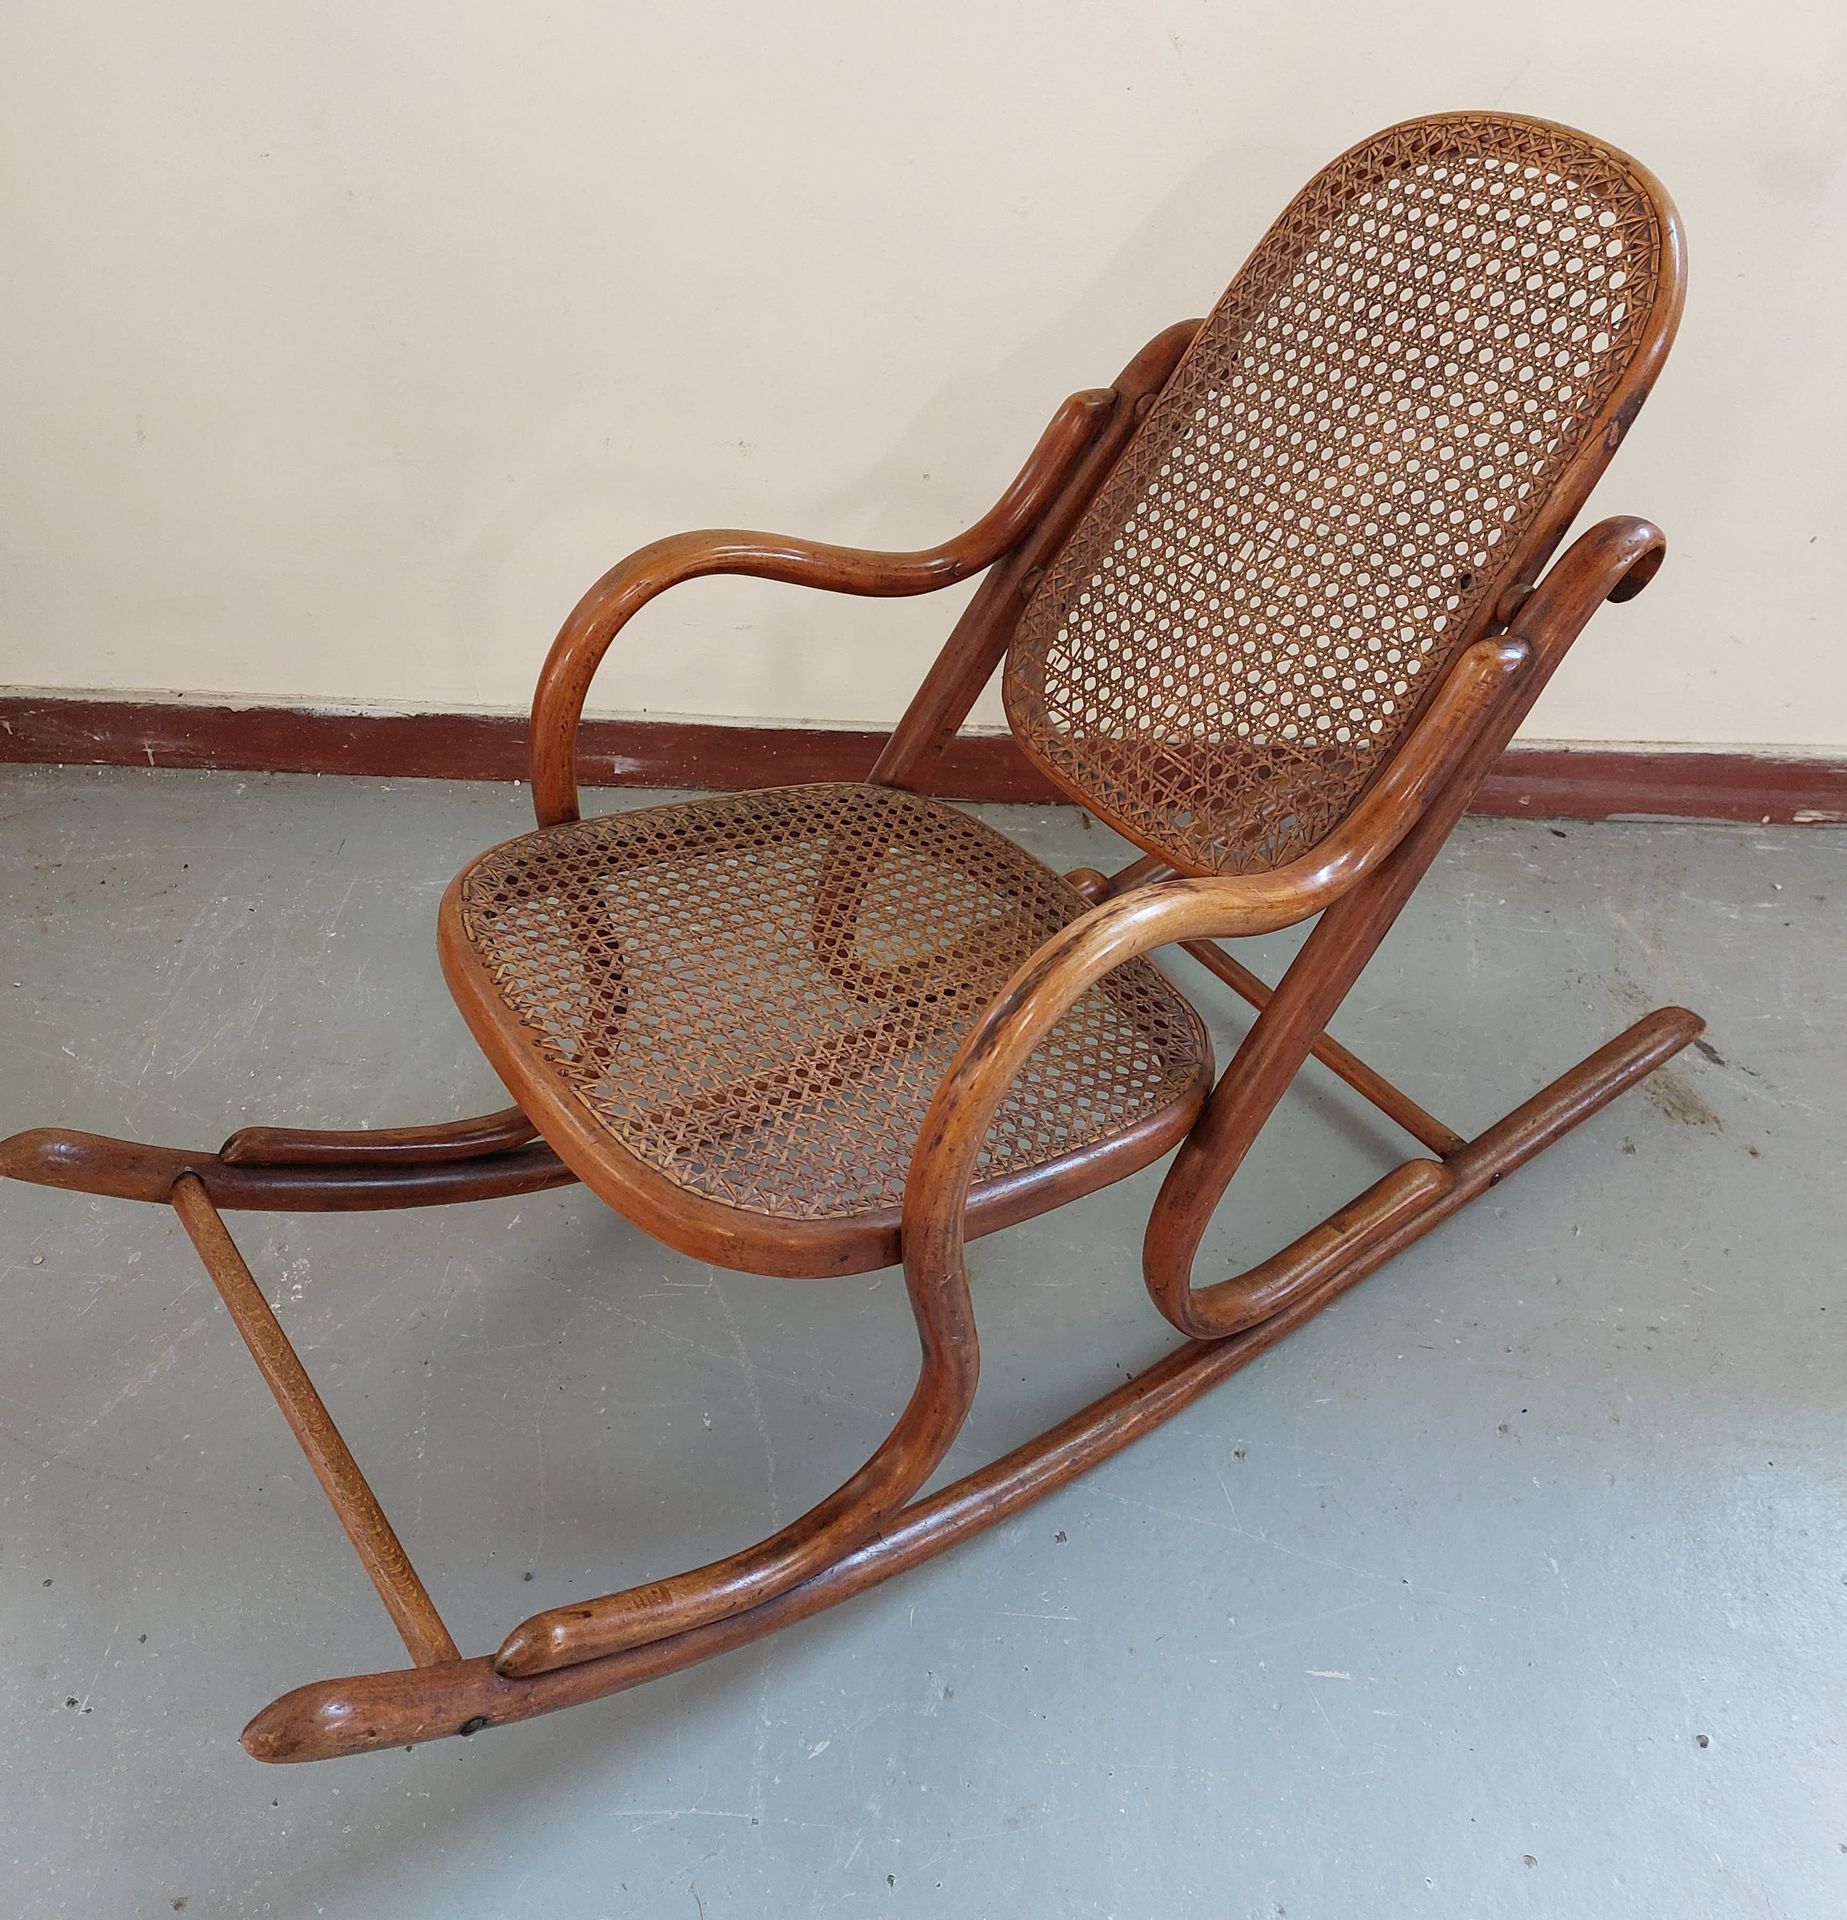 Null THONET attributed to 

Caned rocking chair for child 

Good condition